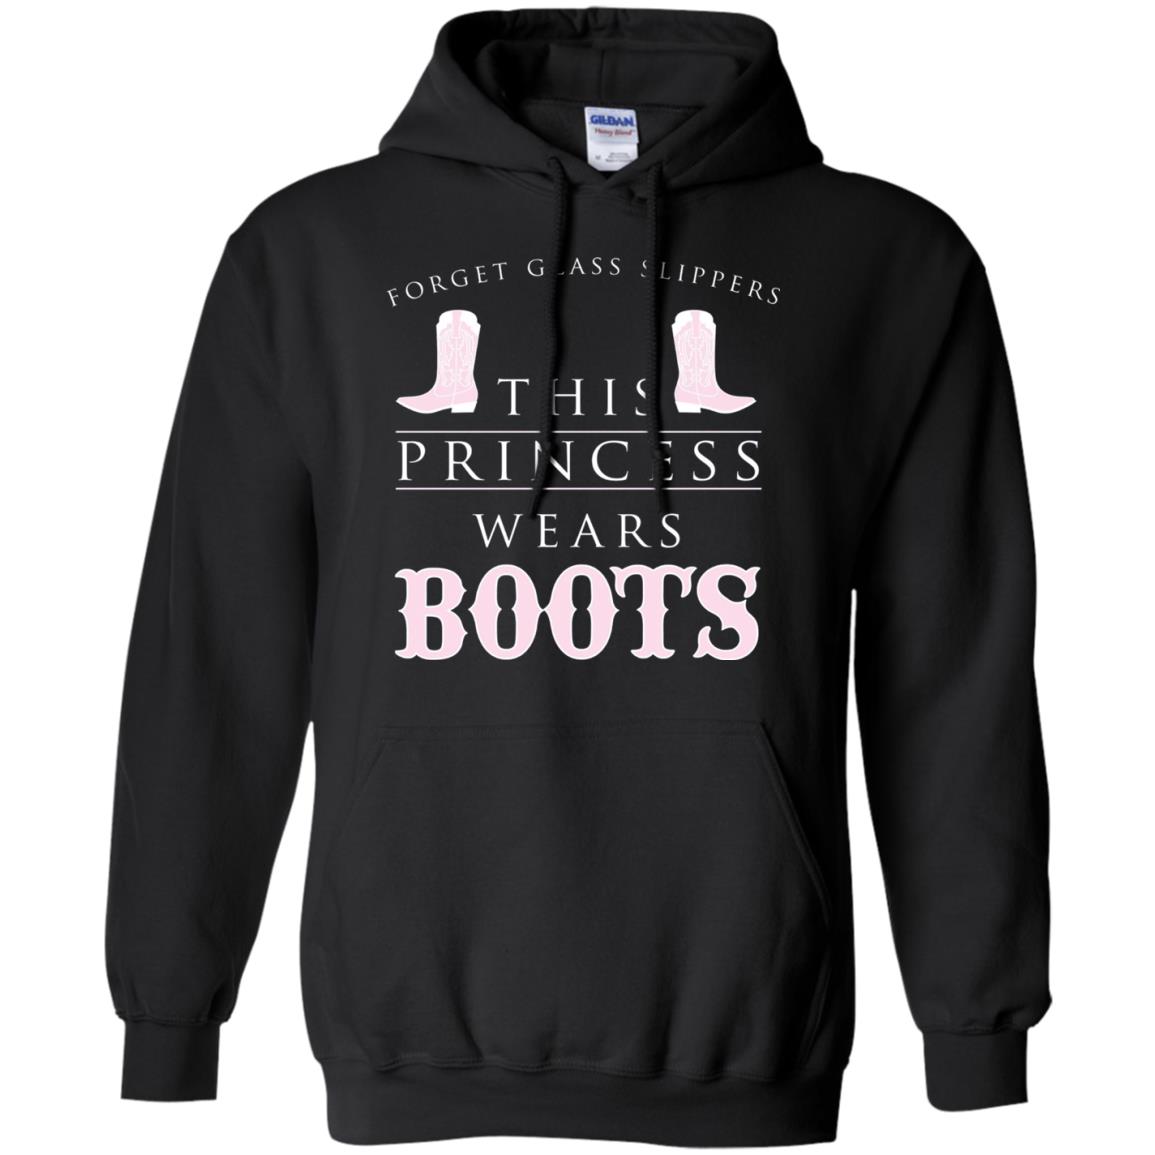 Forget Glass Slippers This Princess Wears Boots T-shirt